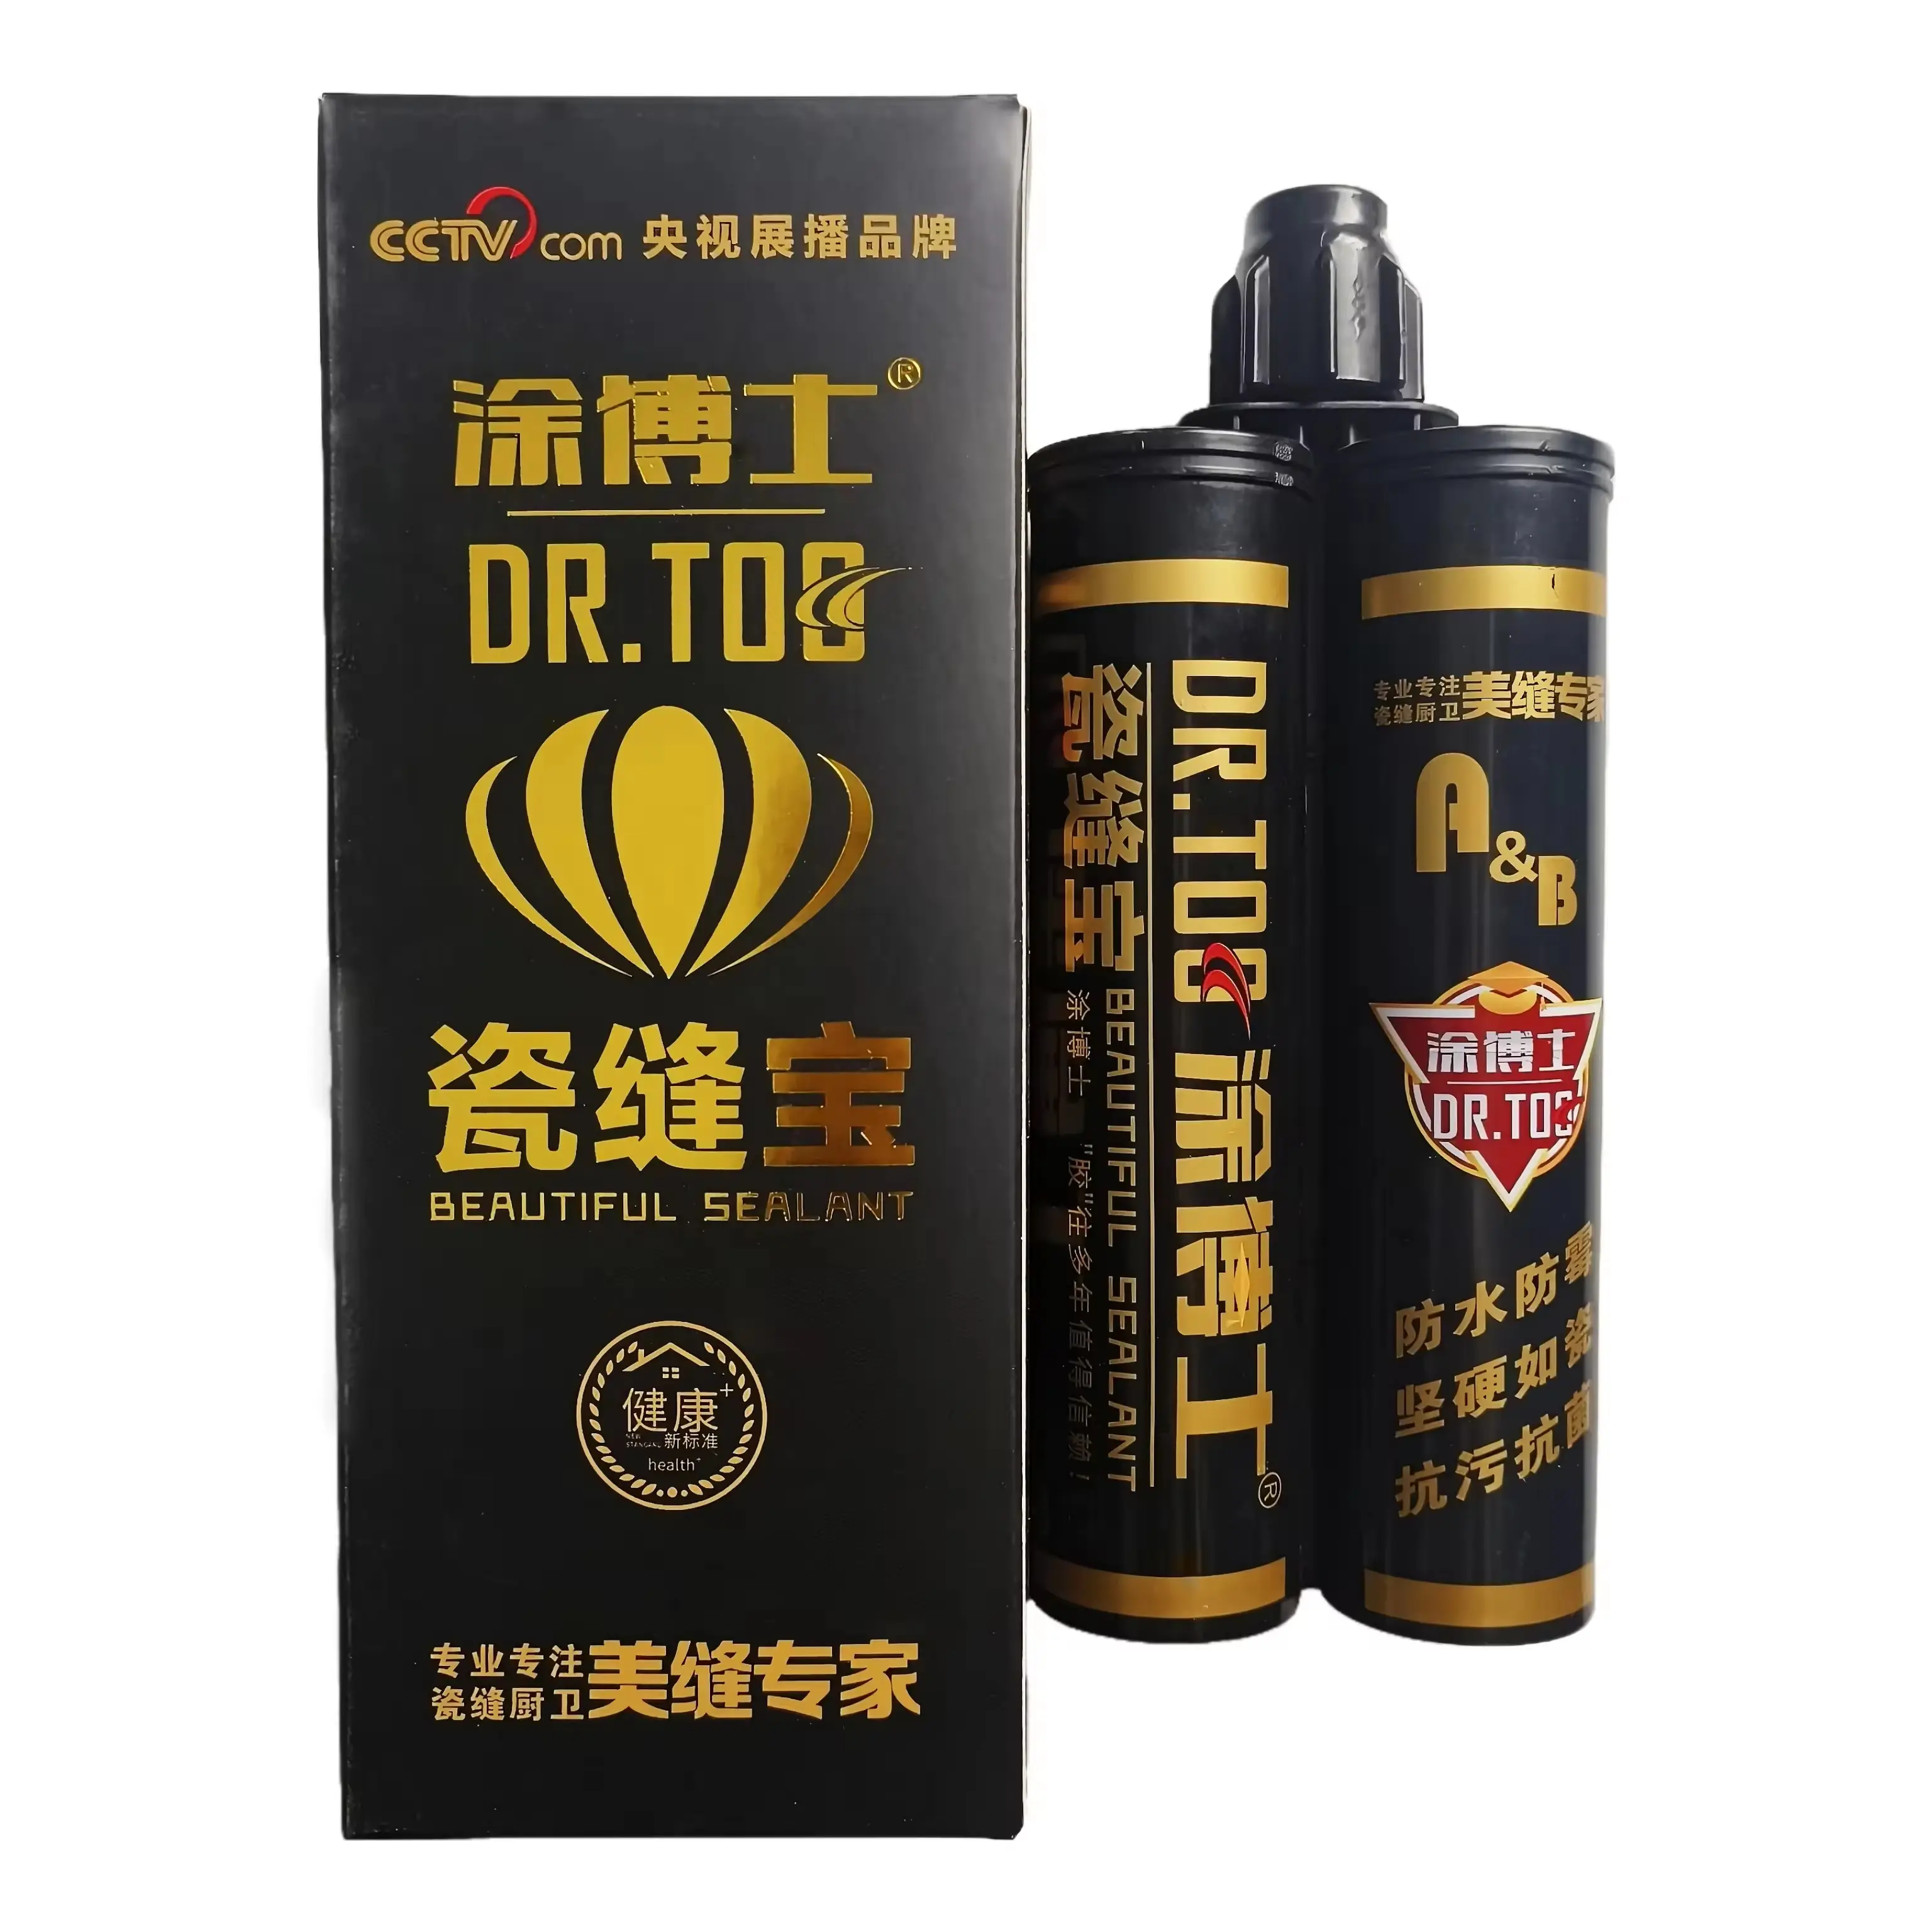 Waterproof Anti-Mildew Epoxy Grout Resin-Based Sealant Adhesive for Kitchen Bathroom Hotel Floor Tiles for Construction Use